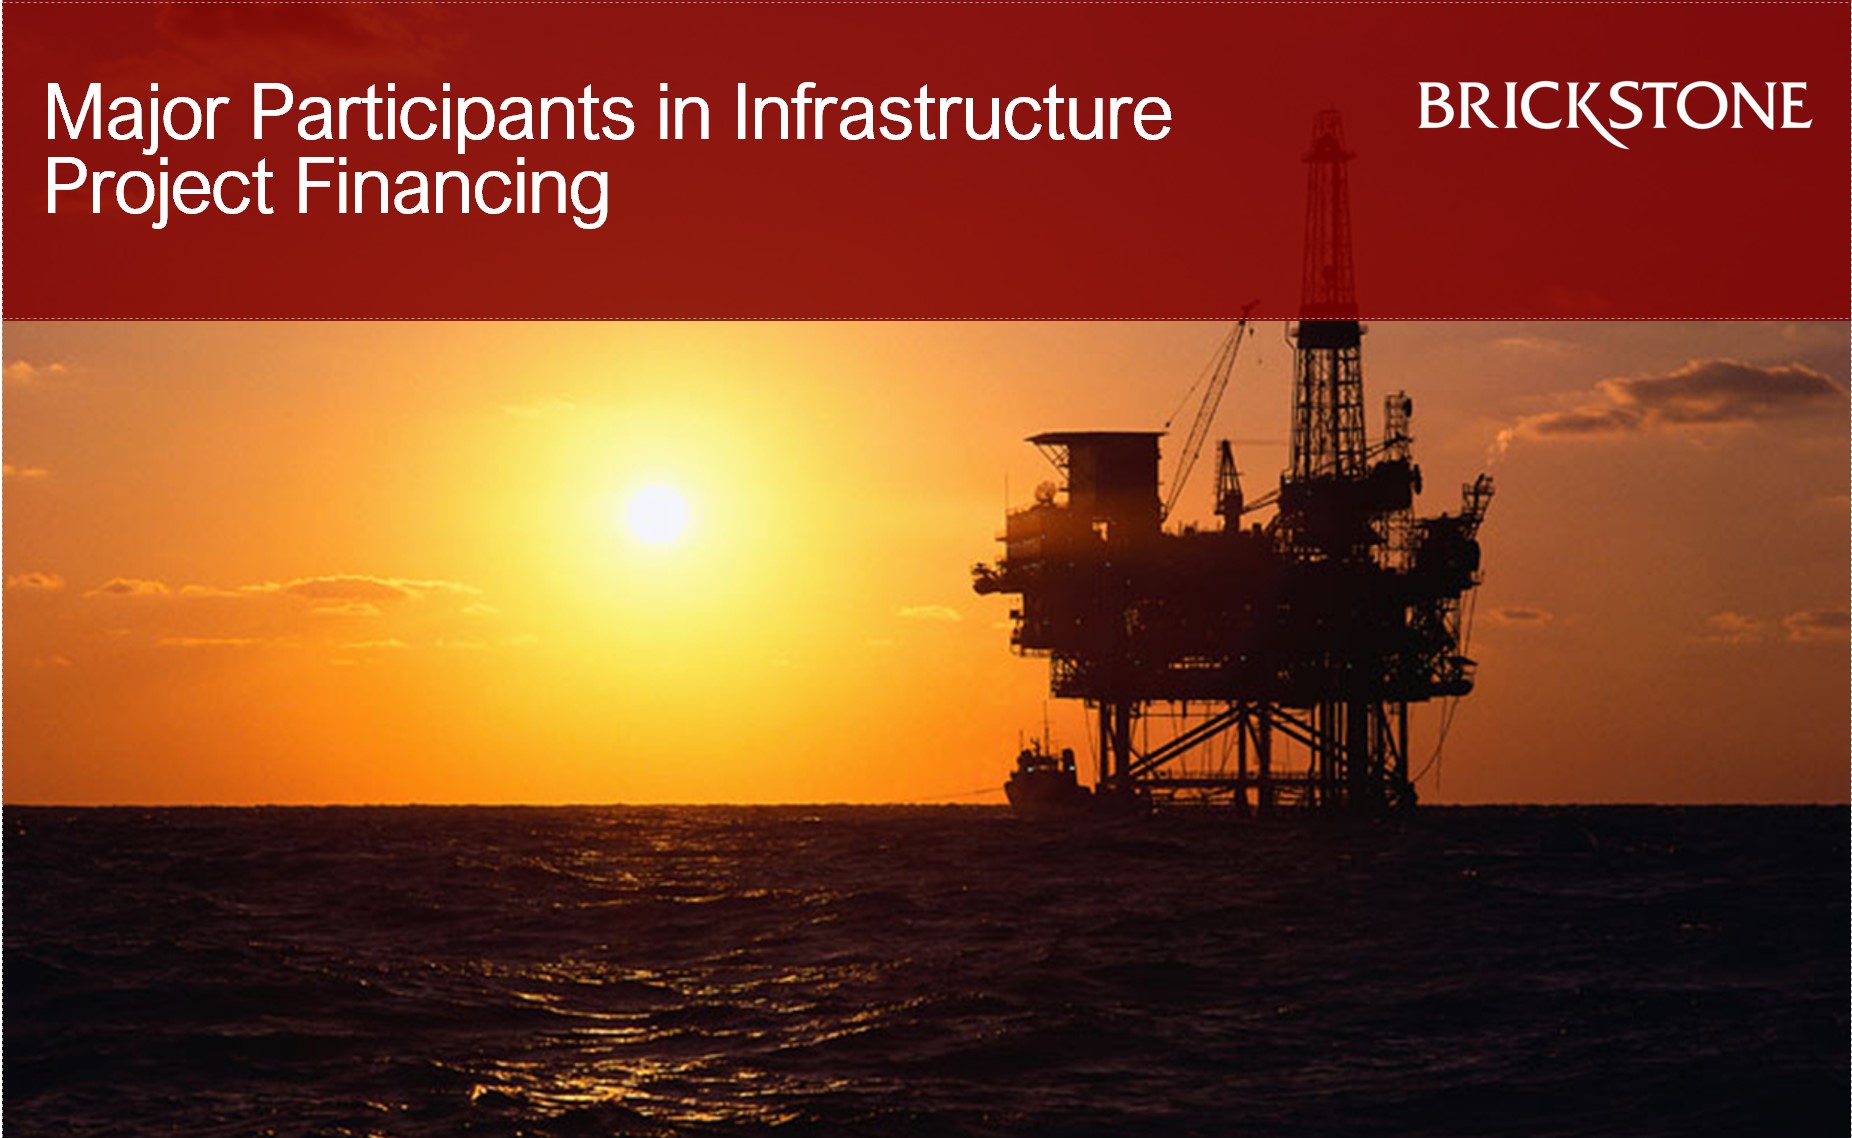 Infrastructure Project Financing